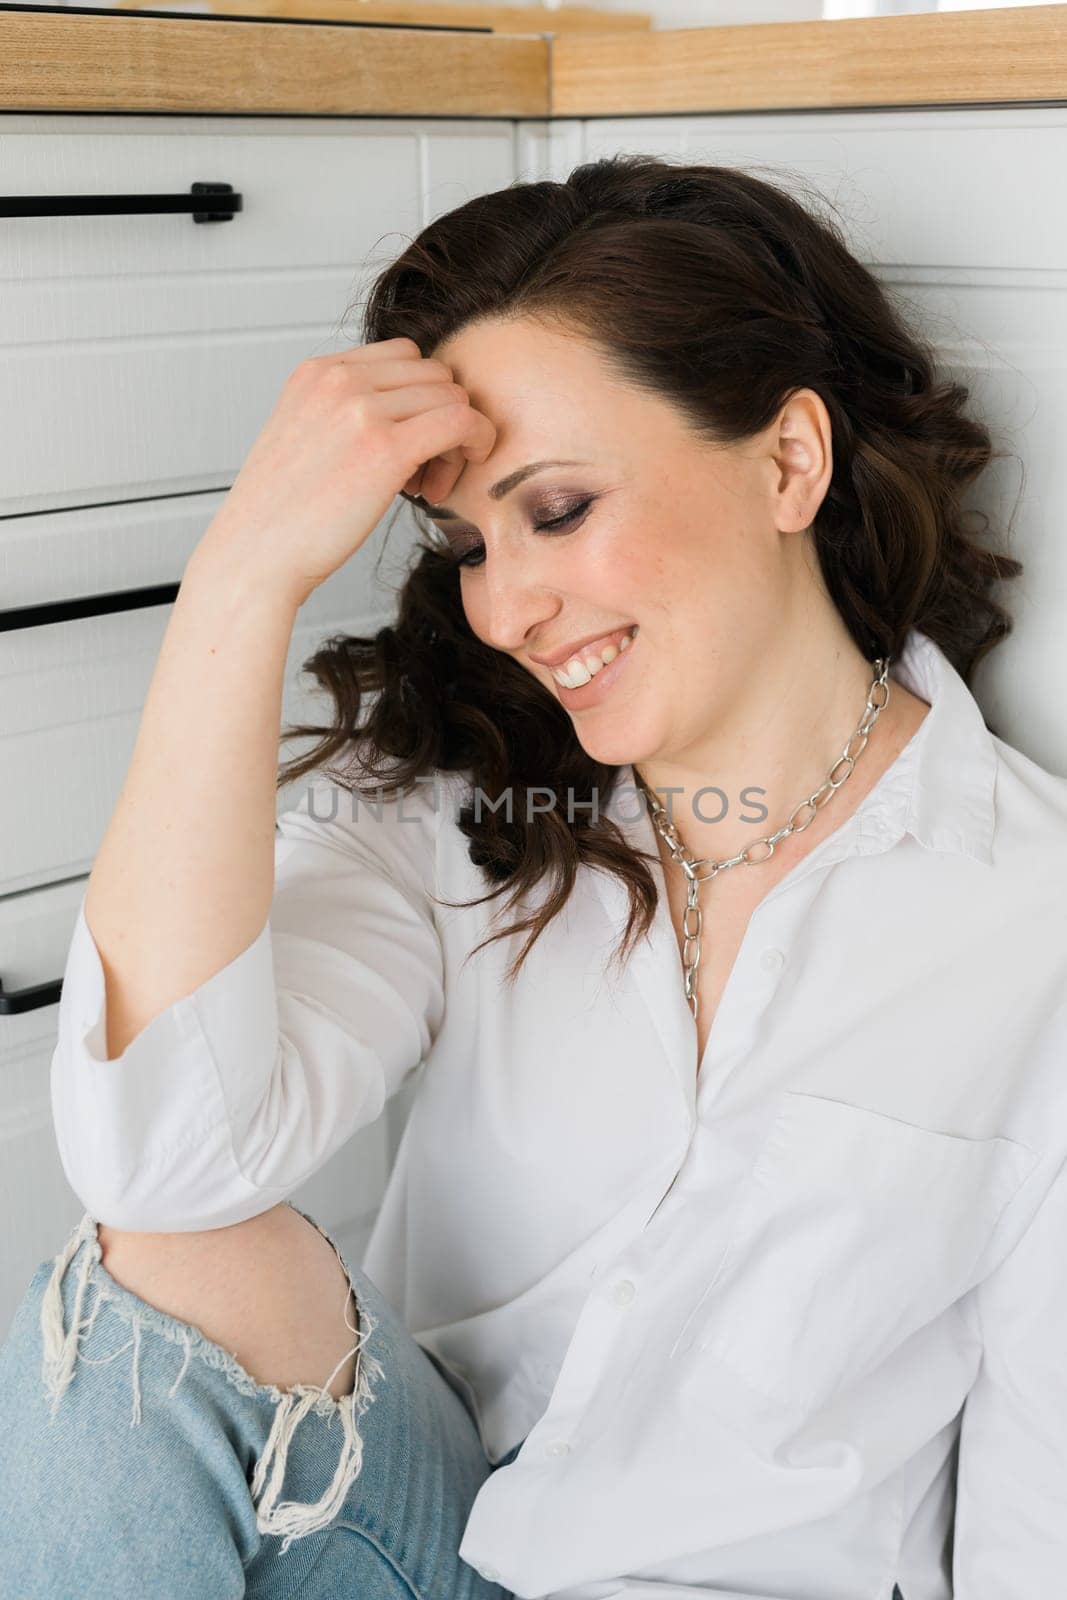 Pretty European emotional laughing woman in a white men's shirt sitting on floor in kitchen. Early morning and smiles when the sun rises. Relaxing and comfortable day.